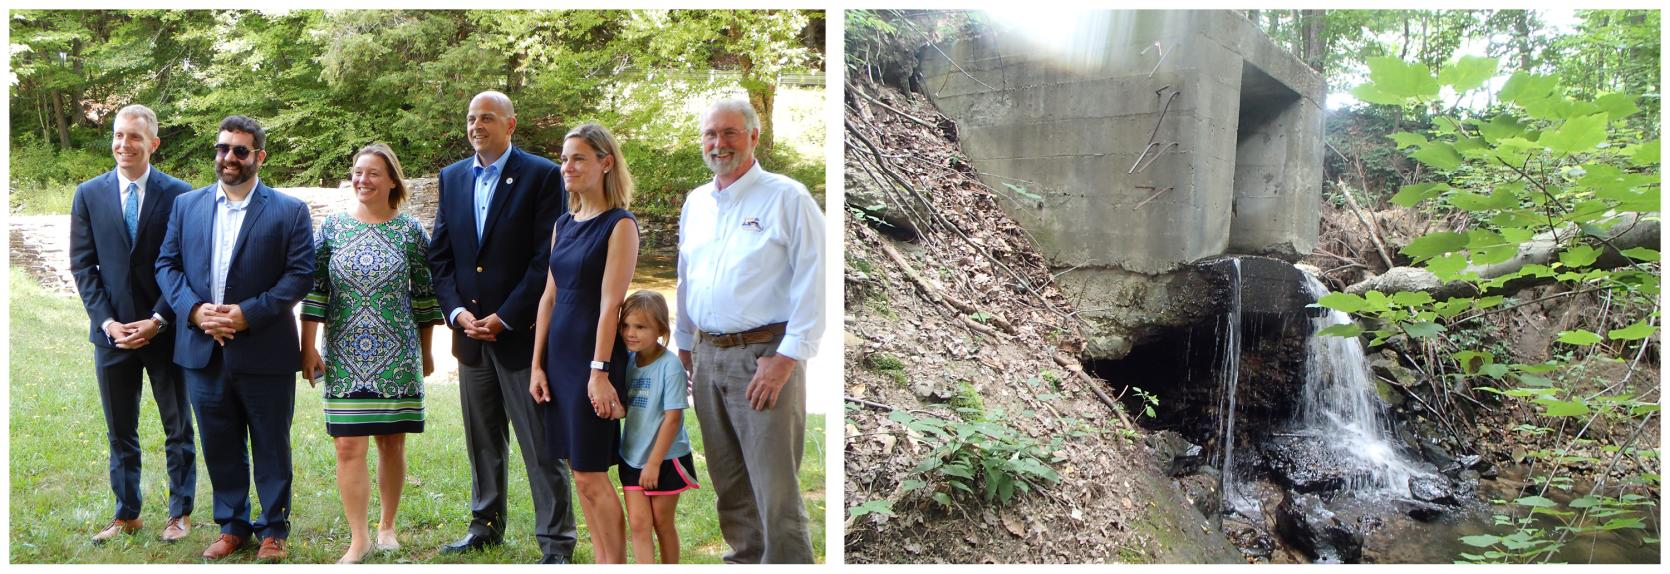 Two images partners gathering at event, the second culvert project that received DER funds.